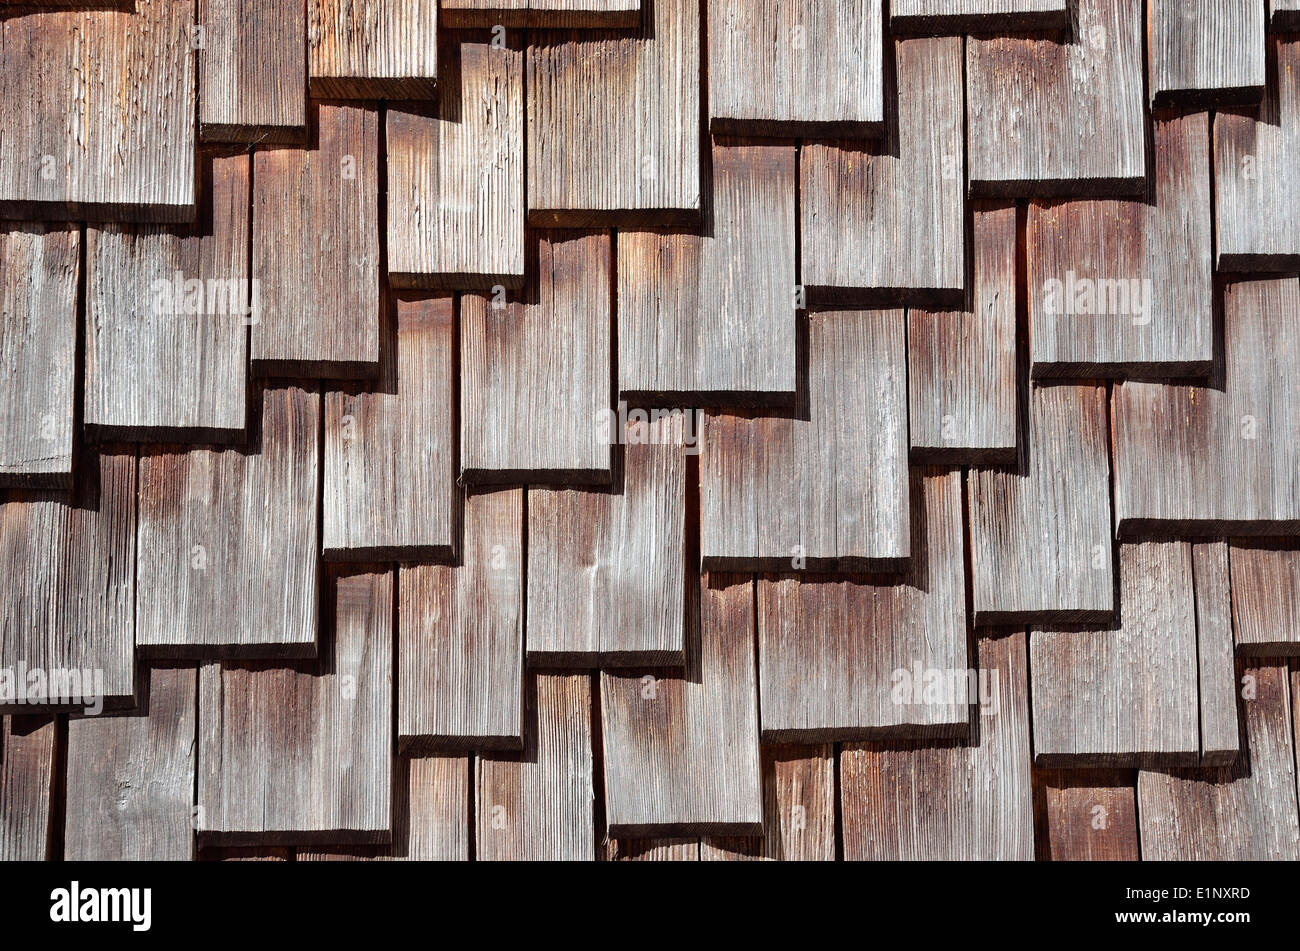 Wooden Roof Shingles - An ancient house roof, consisting of wooden roof shingles, which are arranged in a pattern. Stock Photo